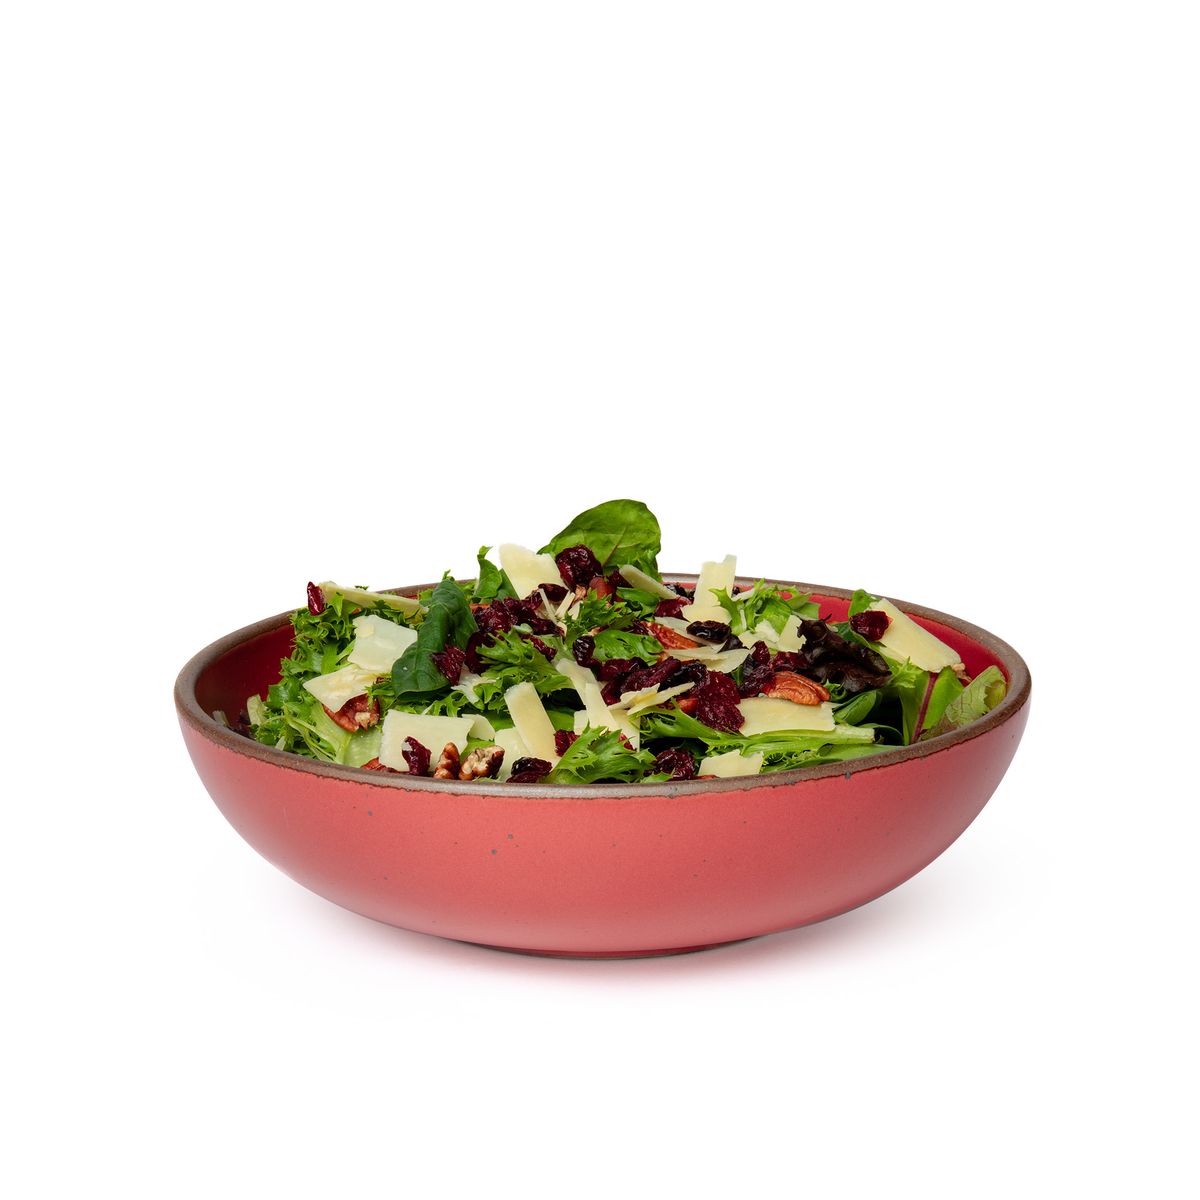 A large shallow serving ceramic bowl in a bold red color featuring iron speckles and an unglazed rim, filled with salad.